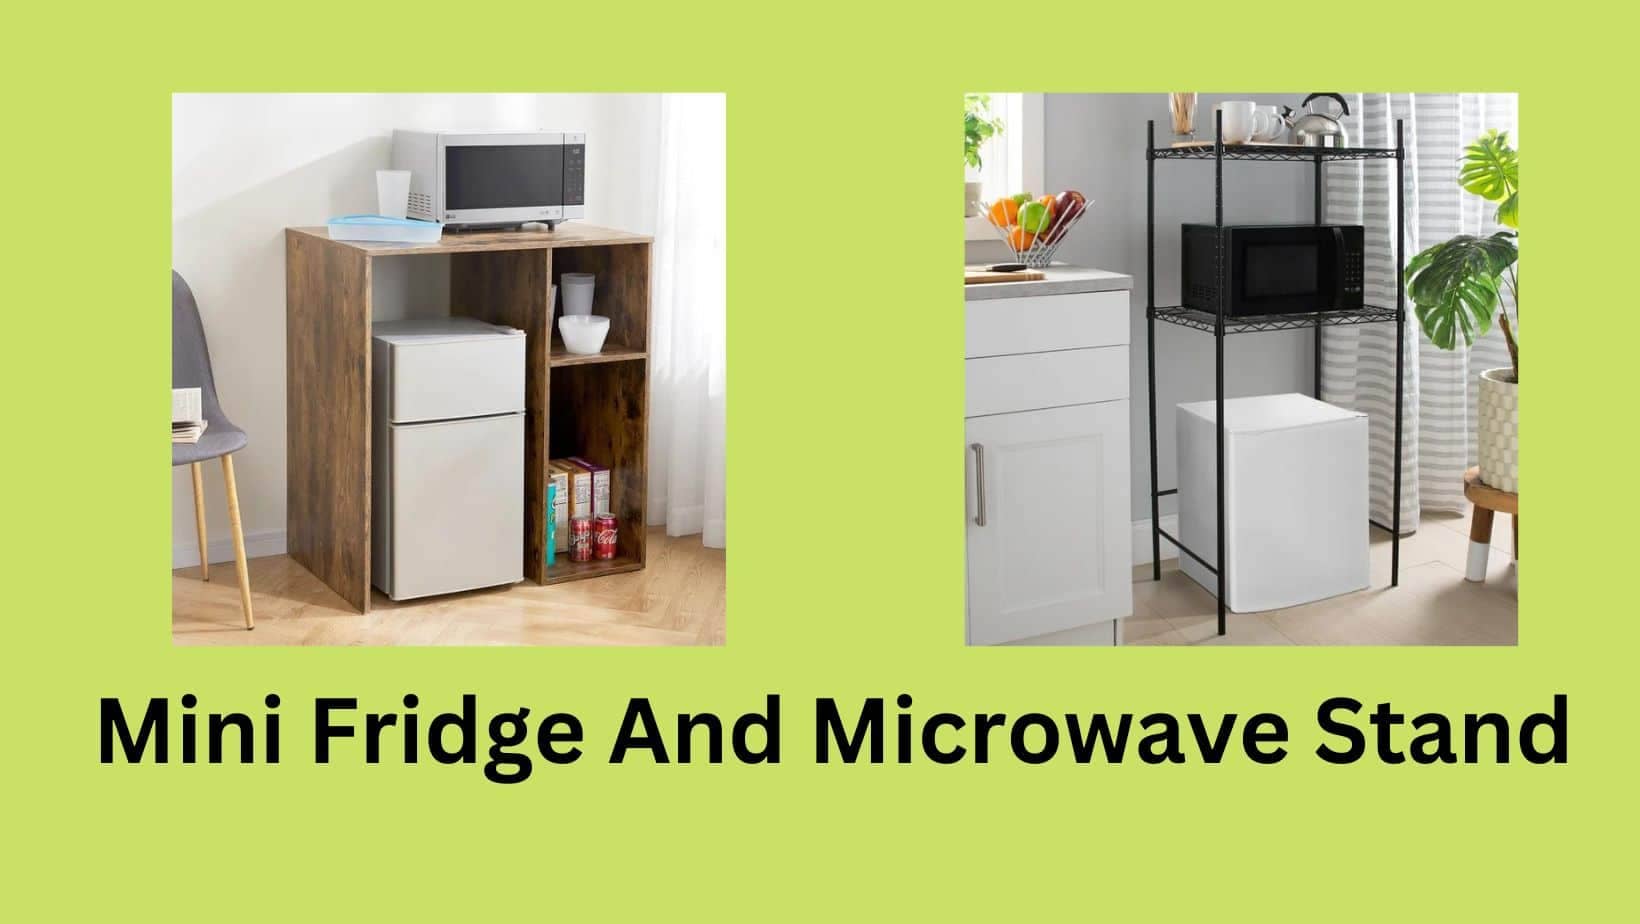 07 Best Mini Fridge And Microwave Stands